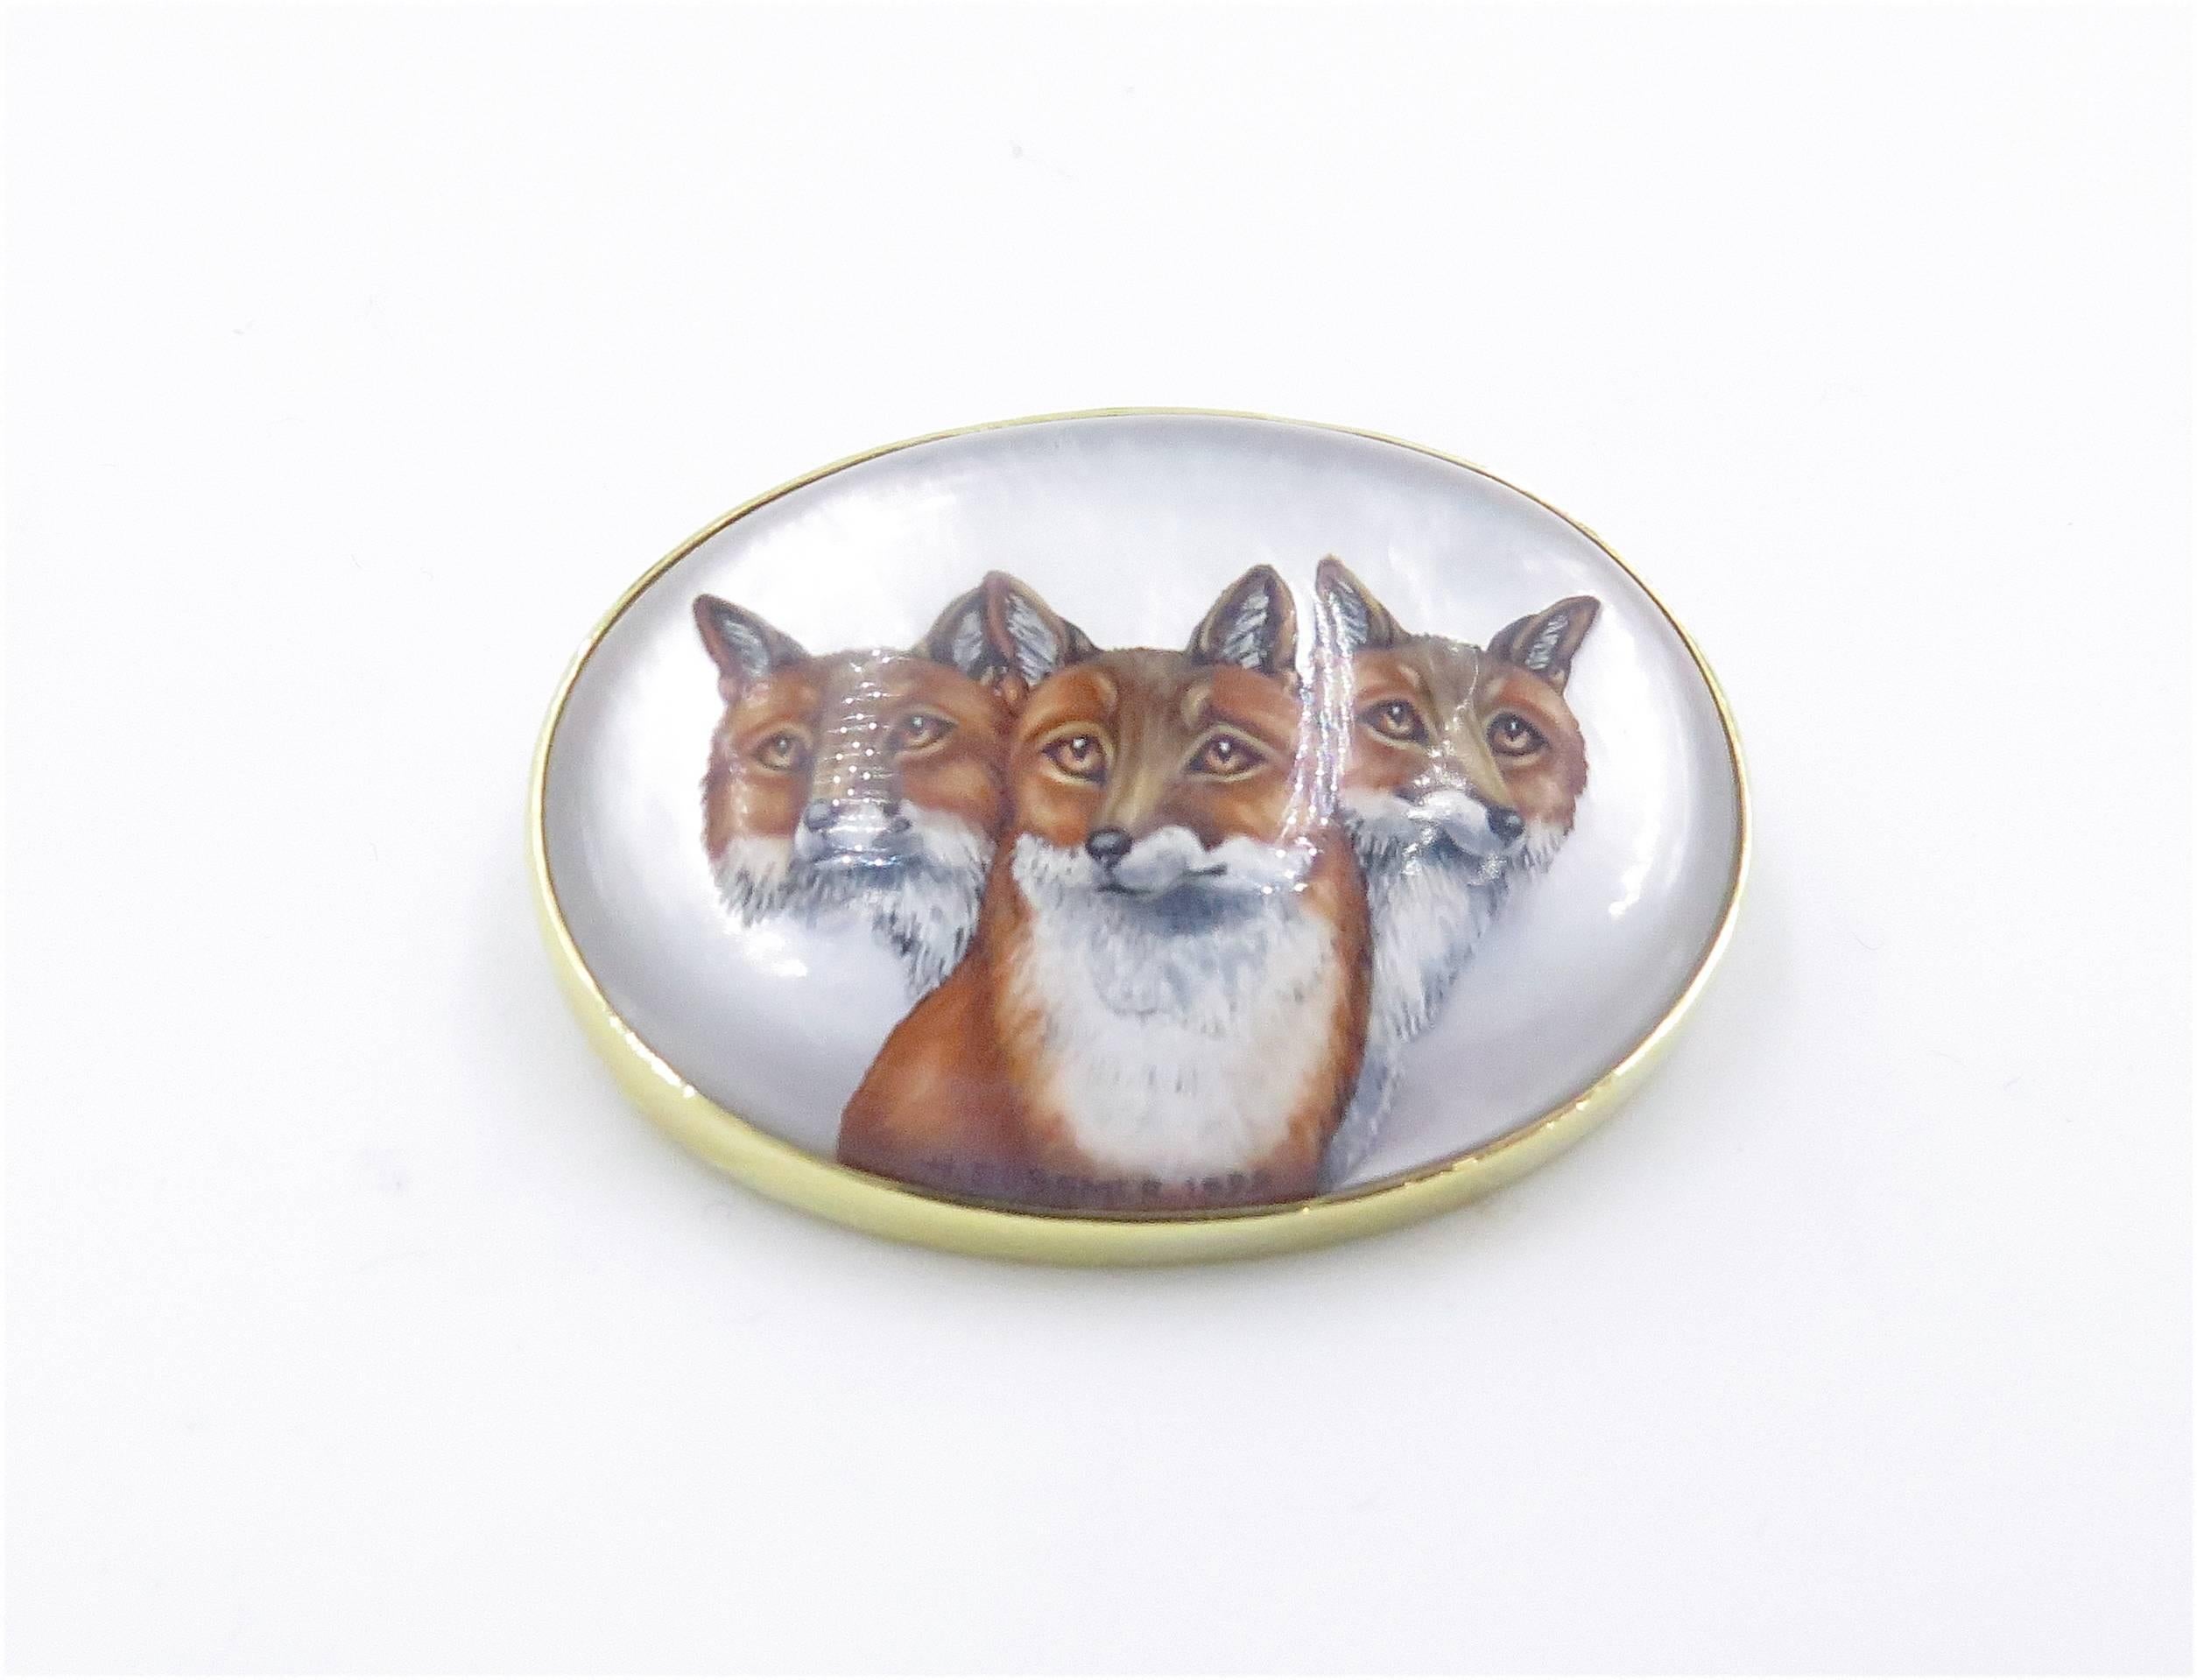 An 18 karat yellow gold, reverse crystal and mother of pearl brooch. Signed H. Bussmer, German. The oval plaque depicting (3) three foxes.  Measurements are approximately 1 1/2 x 1 1/4 inches. Signed H. Bussmer, 1999. Gross weight approximately 30.1